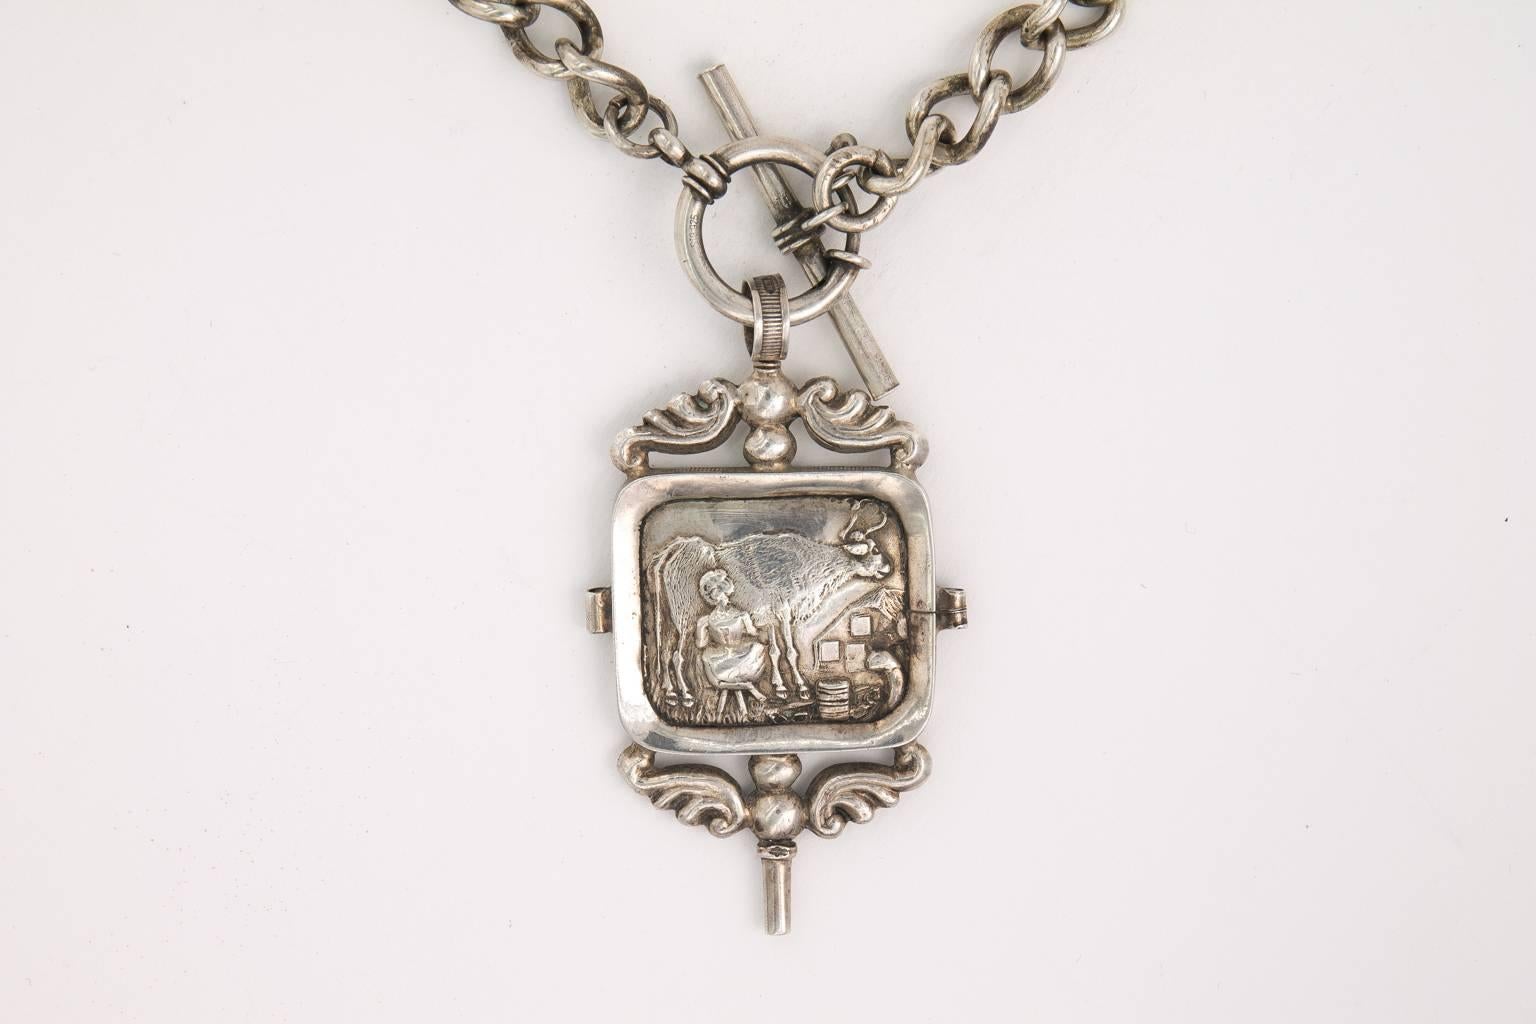 19th Century sterling silver English watch key on sterling silver watch chain turned into necklace. Watch fab depicts milk girl milking cow.
PERIOD:1800-1890
MATERIALS:Silver
